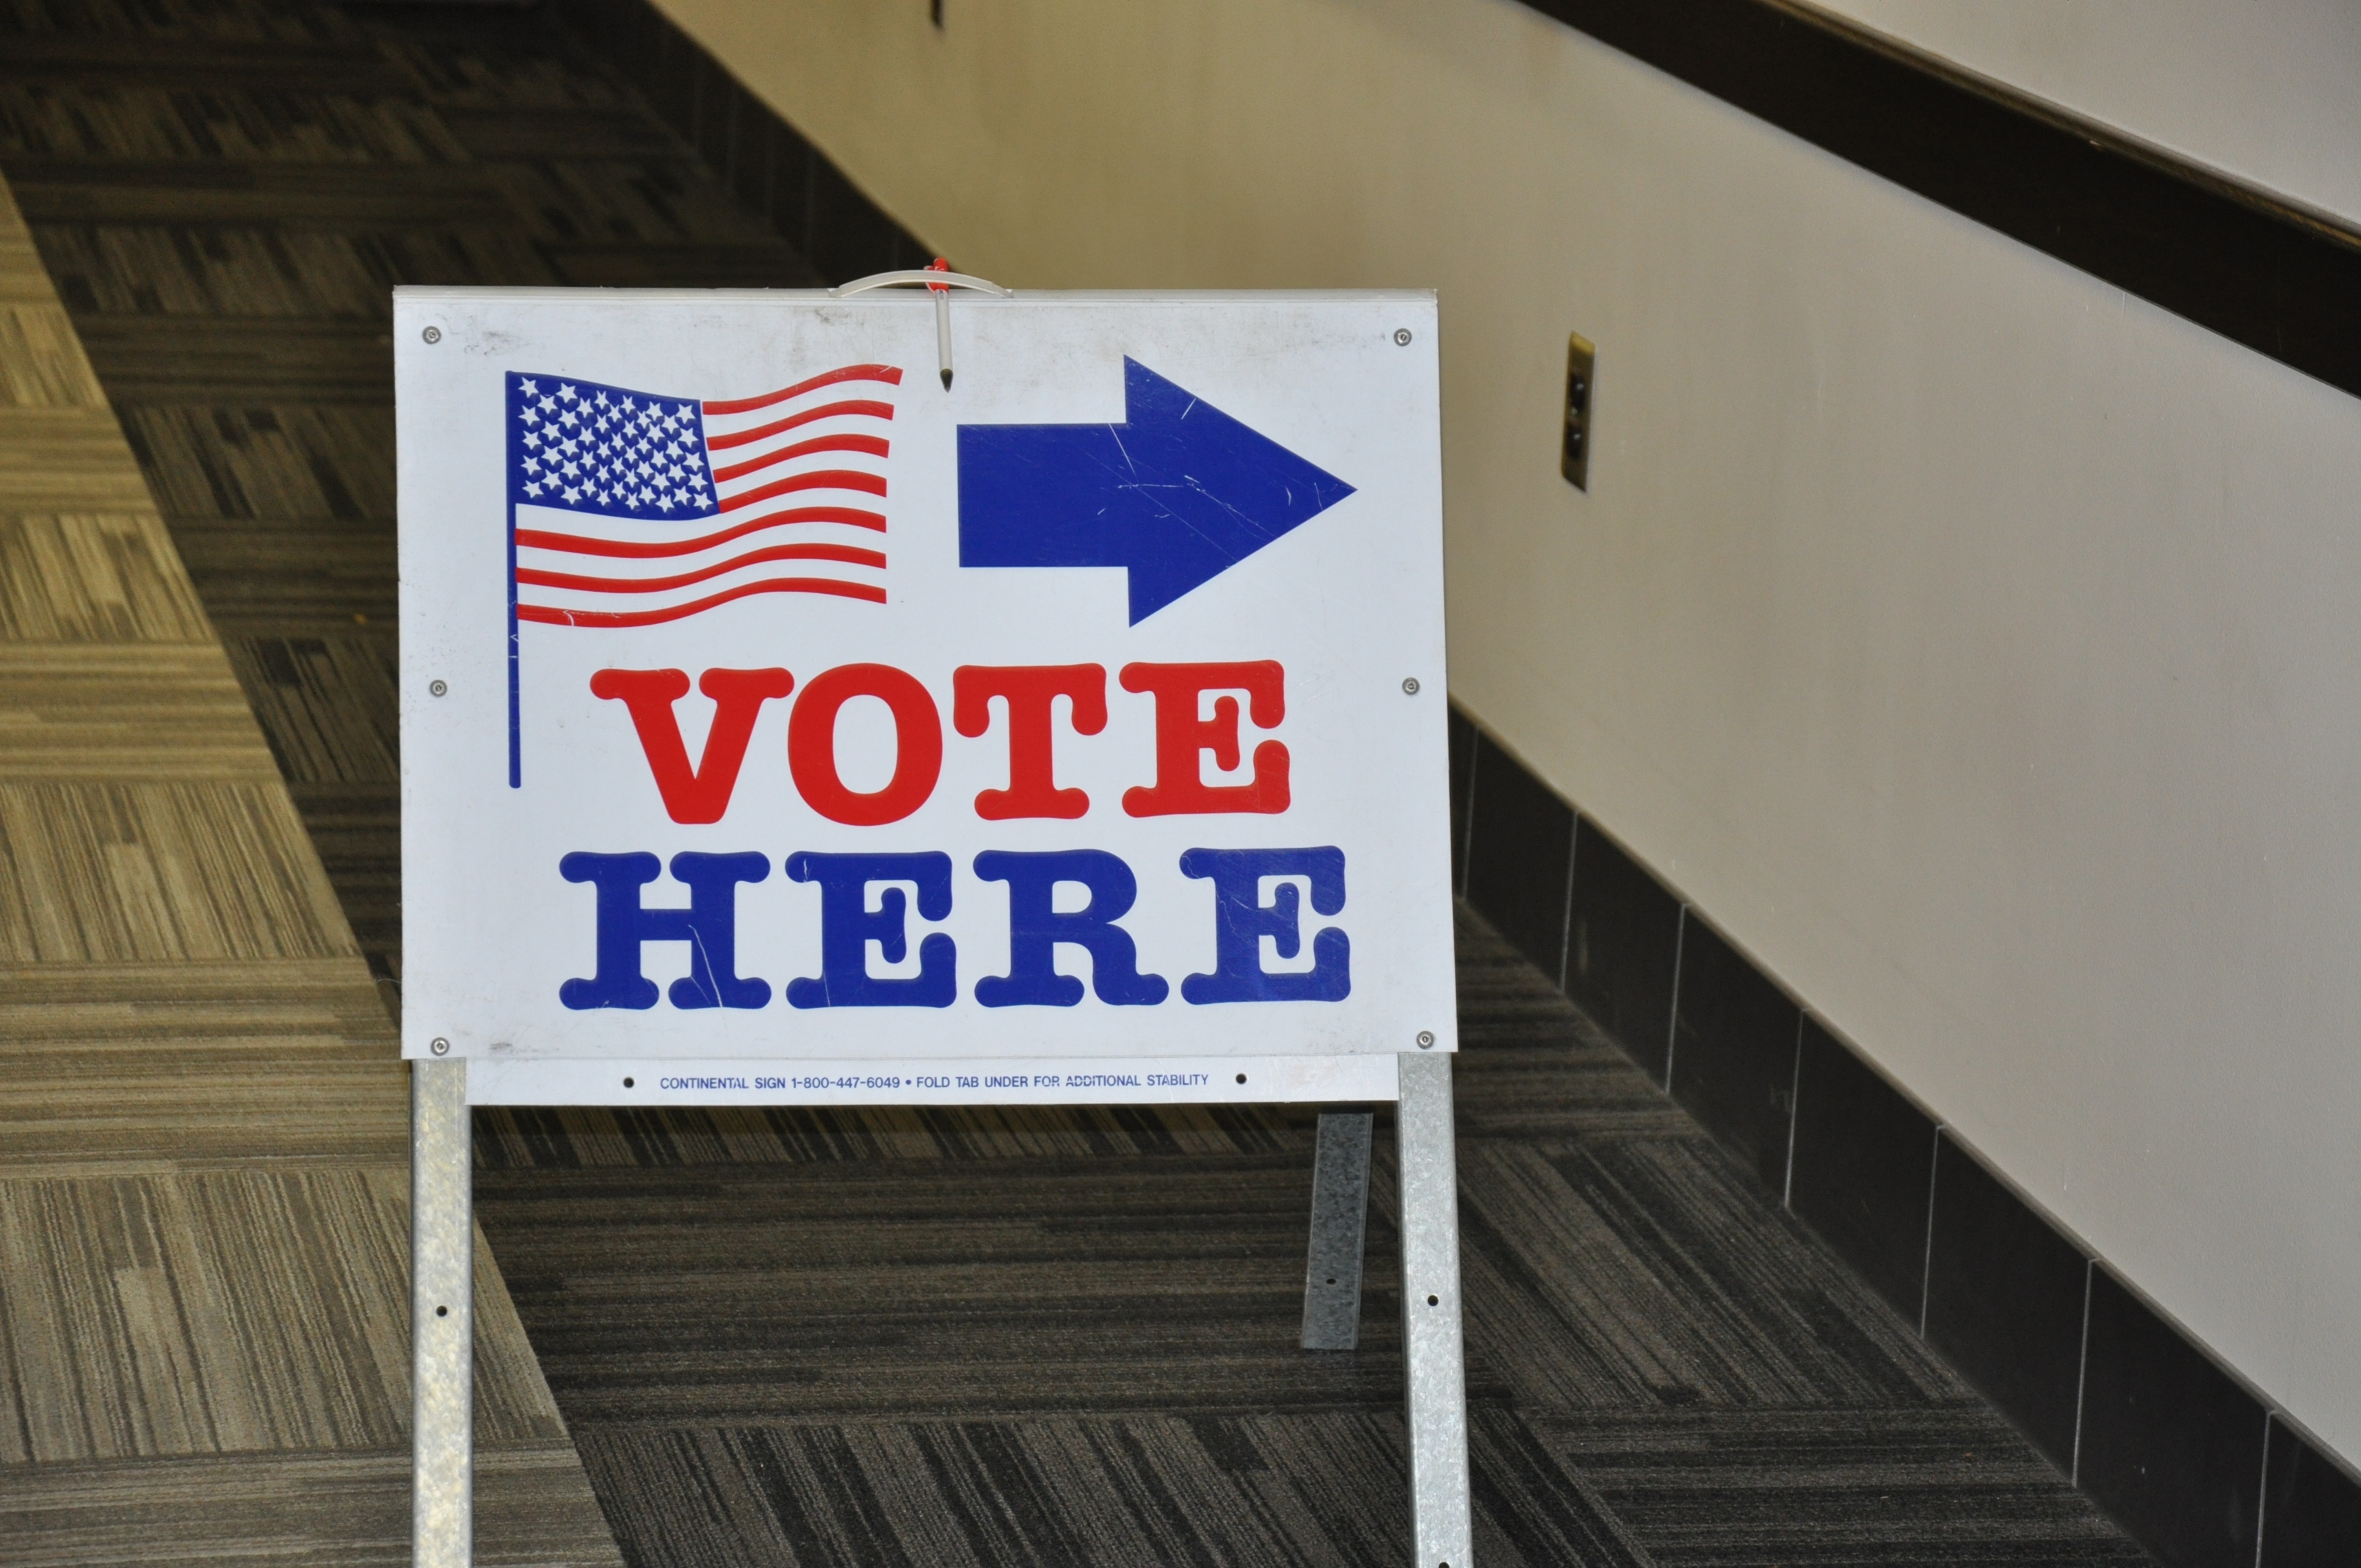 A "vote here" sign with an american flag and a blue arrow pointing to the right, placed in a hallway with carpeted flooring.